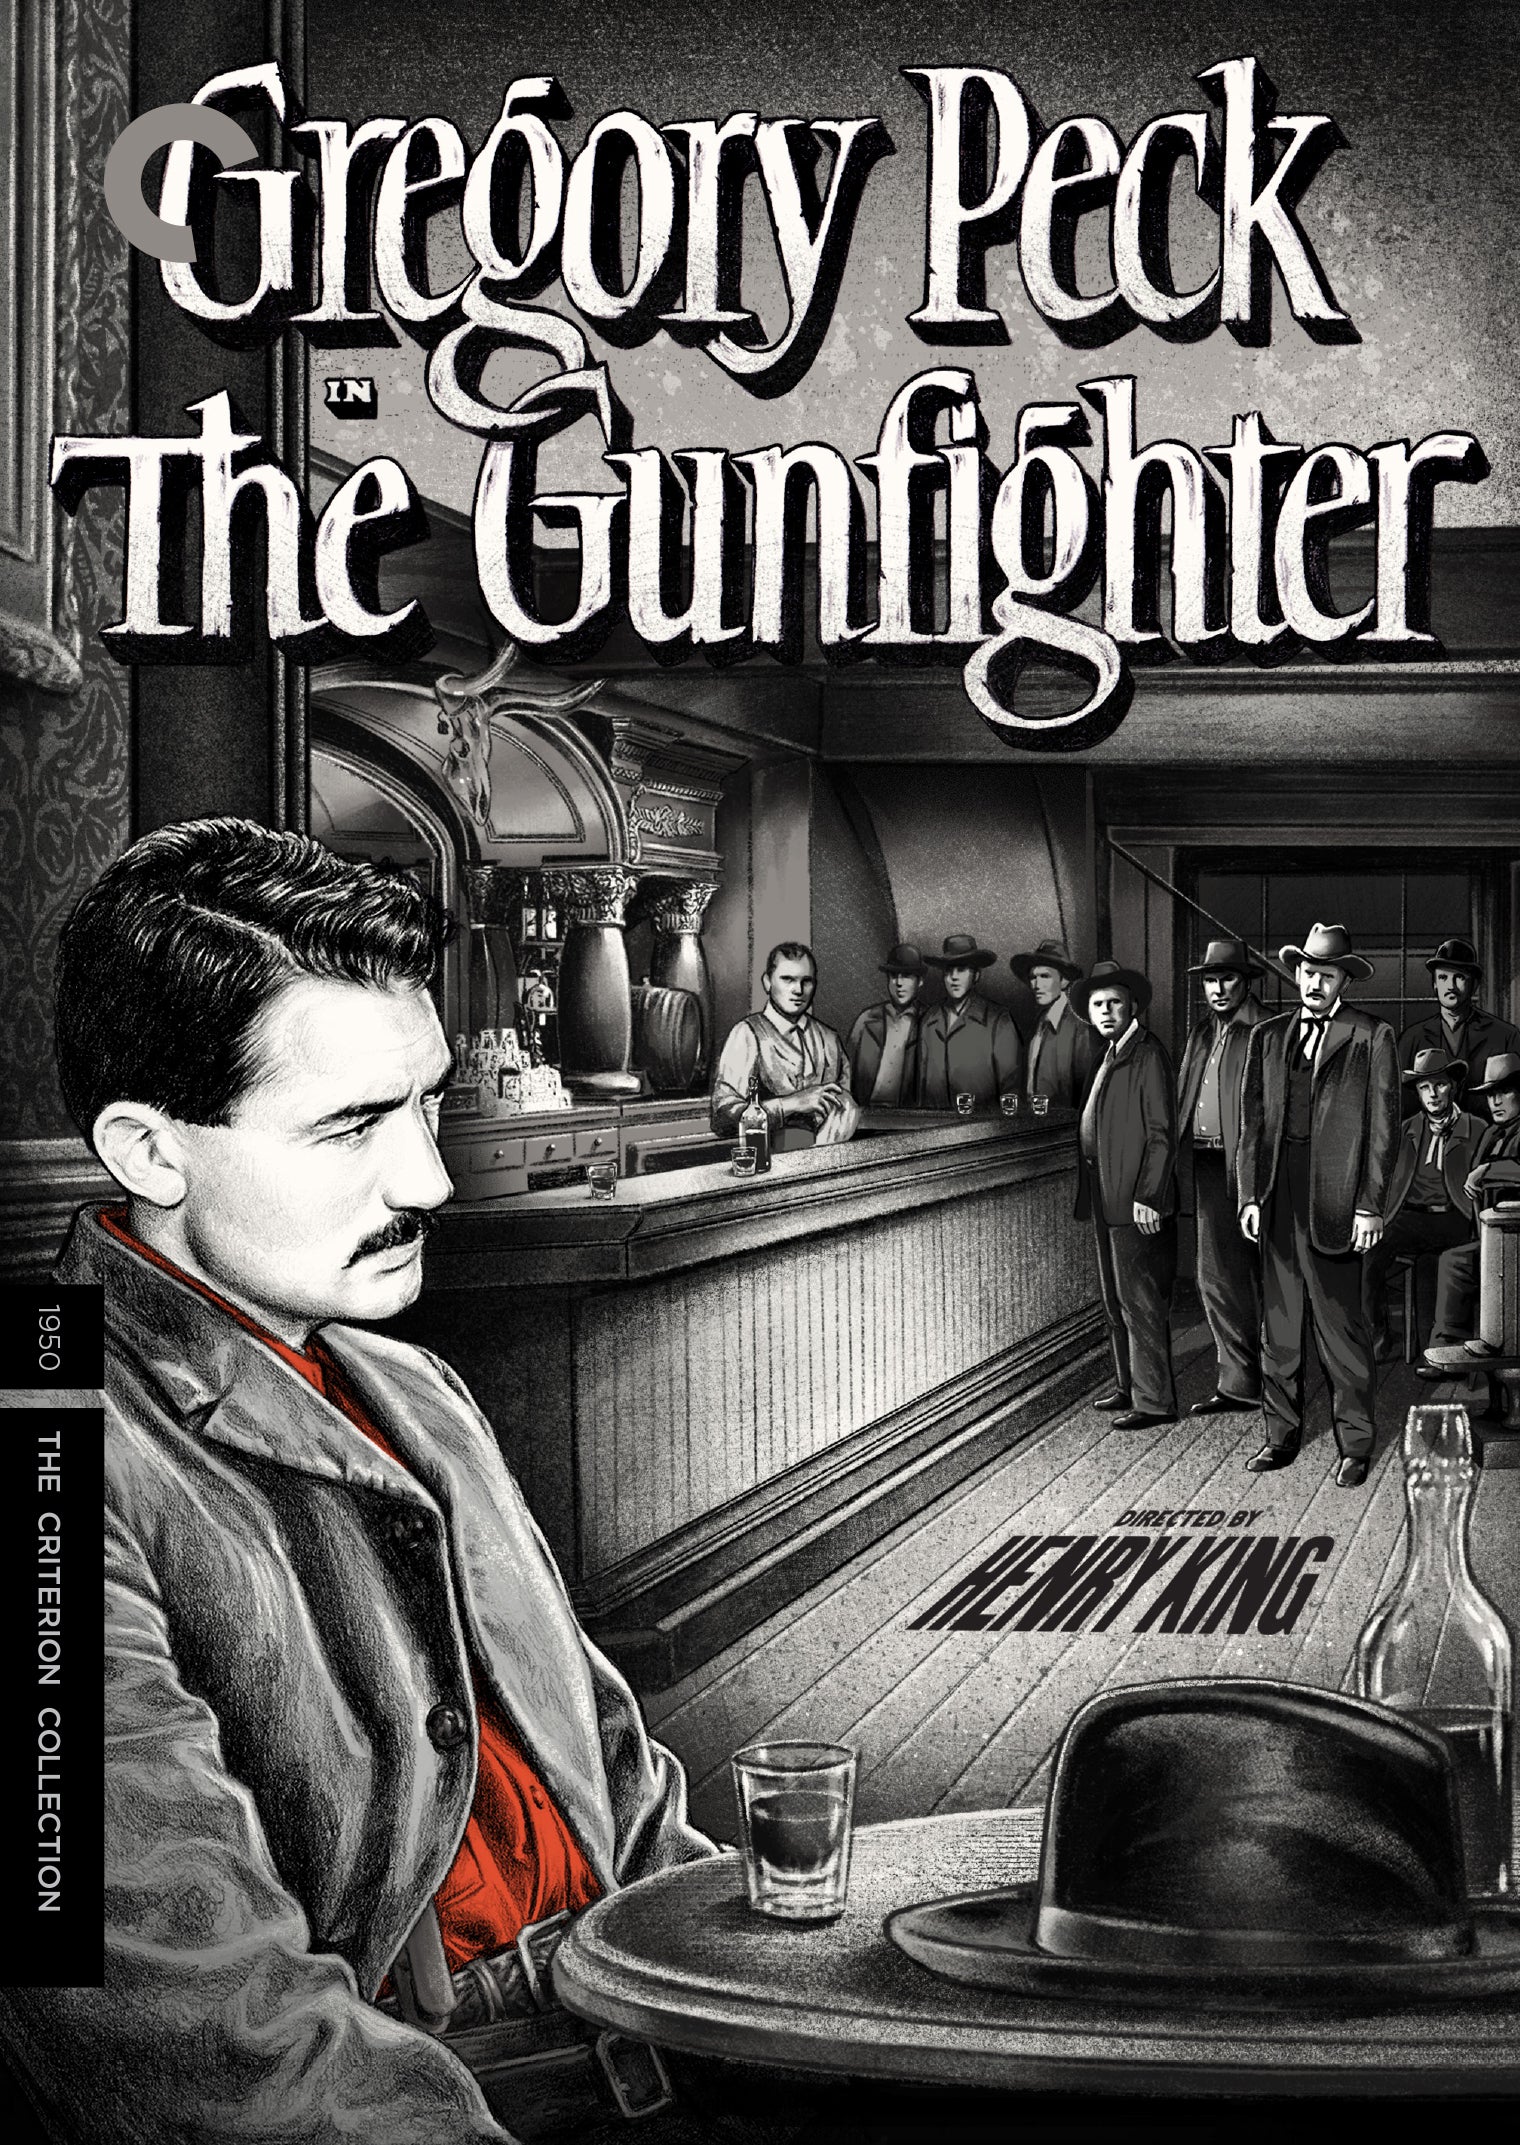 Gunfighter [Criterion Collection] cover art